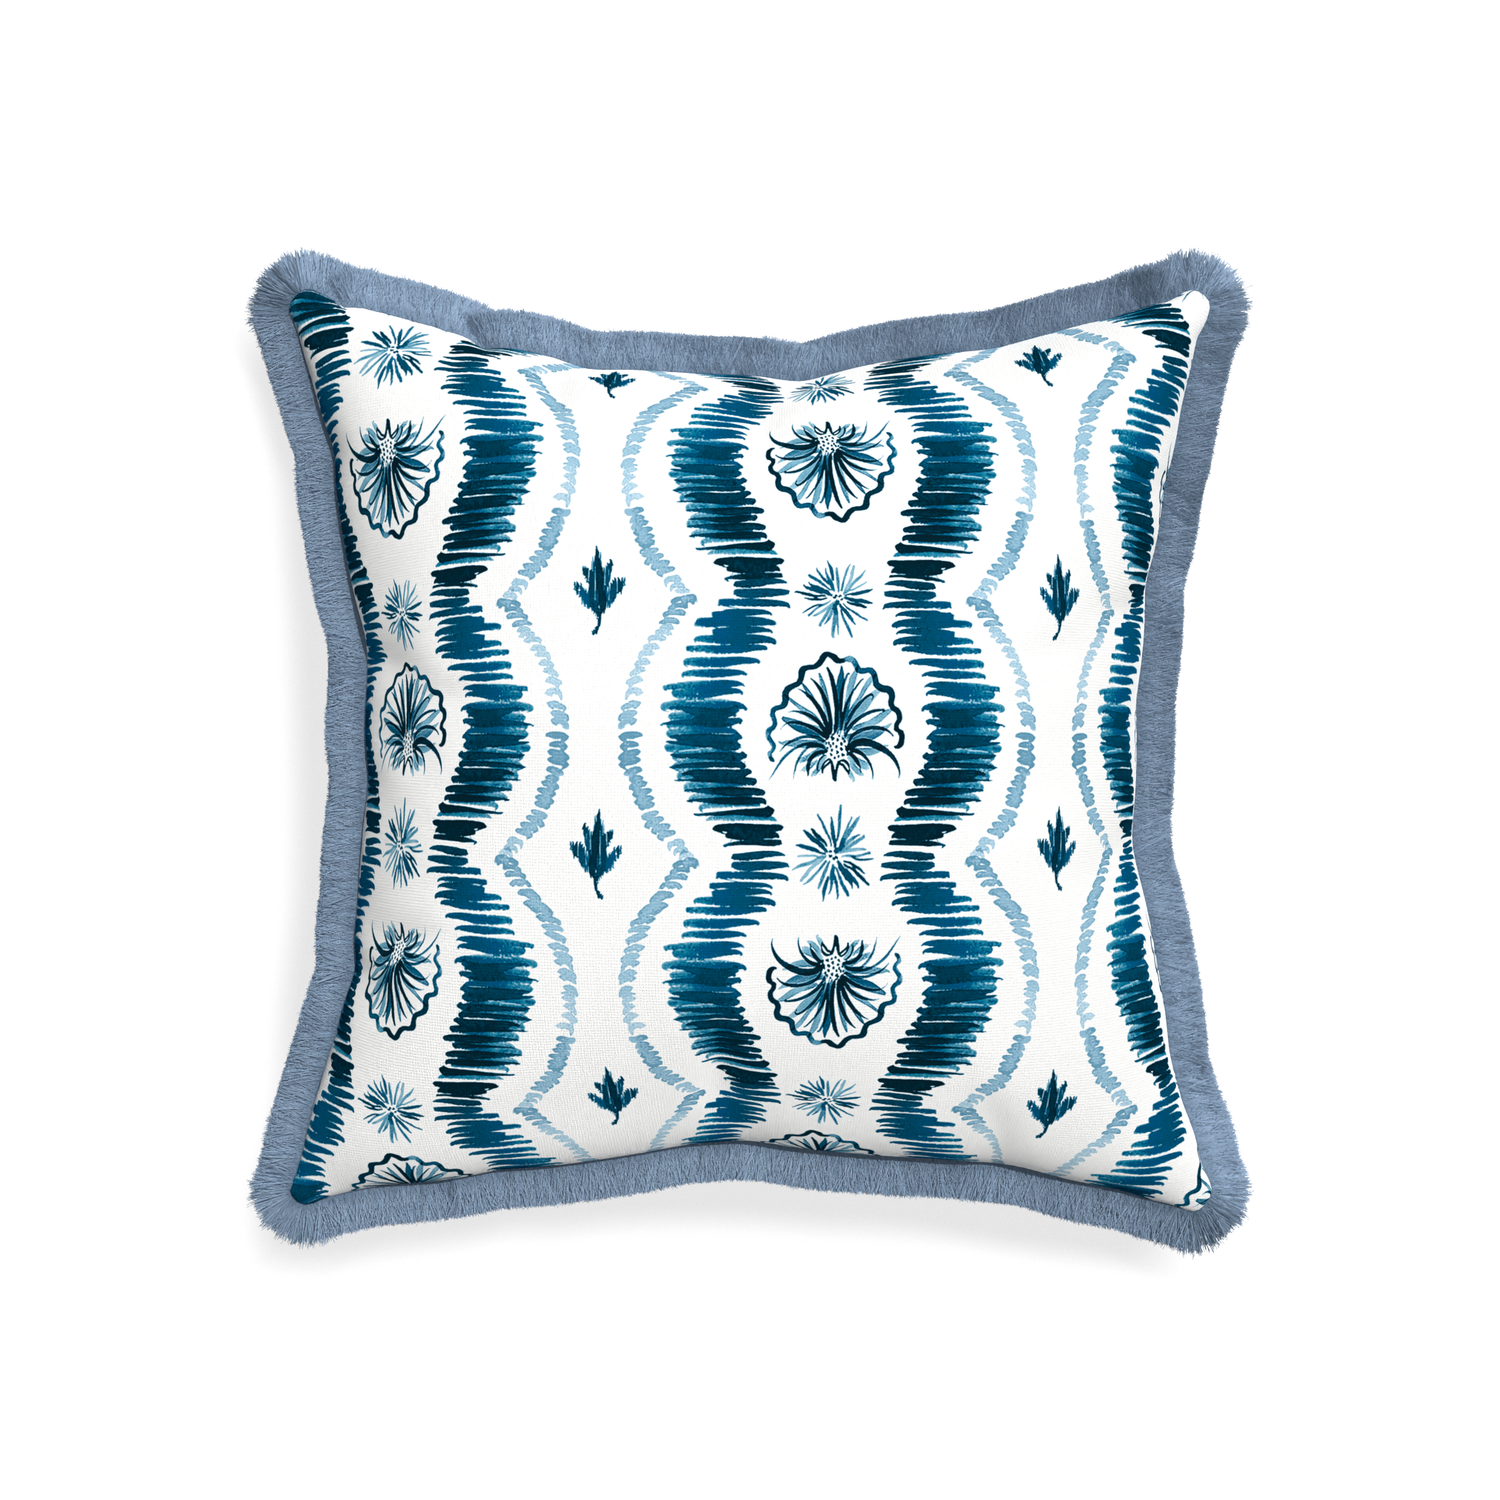 20 inch Square Blue Ikat Stripe Pillow with sky blue fringe